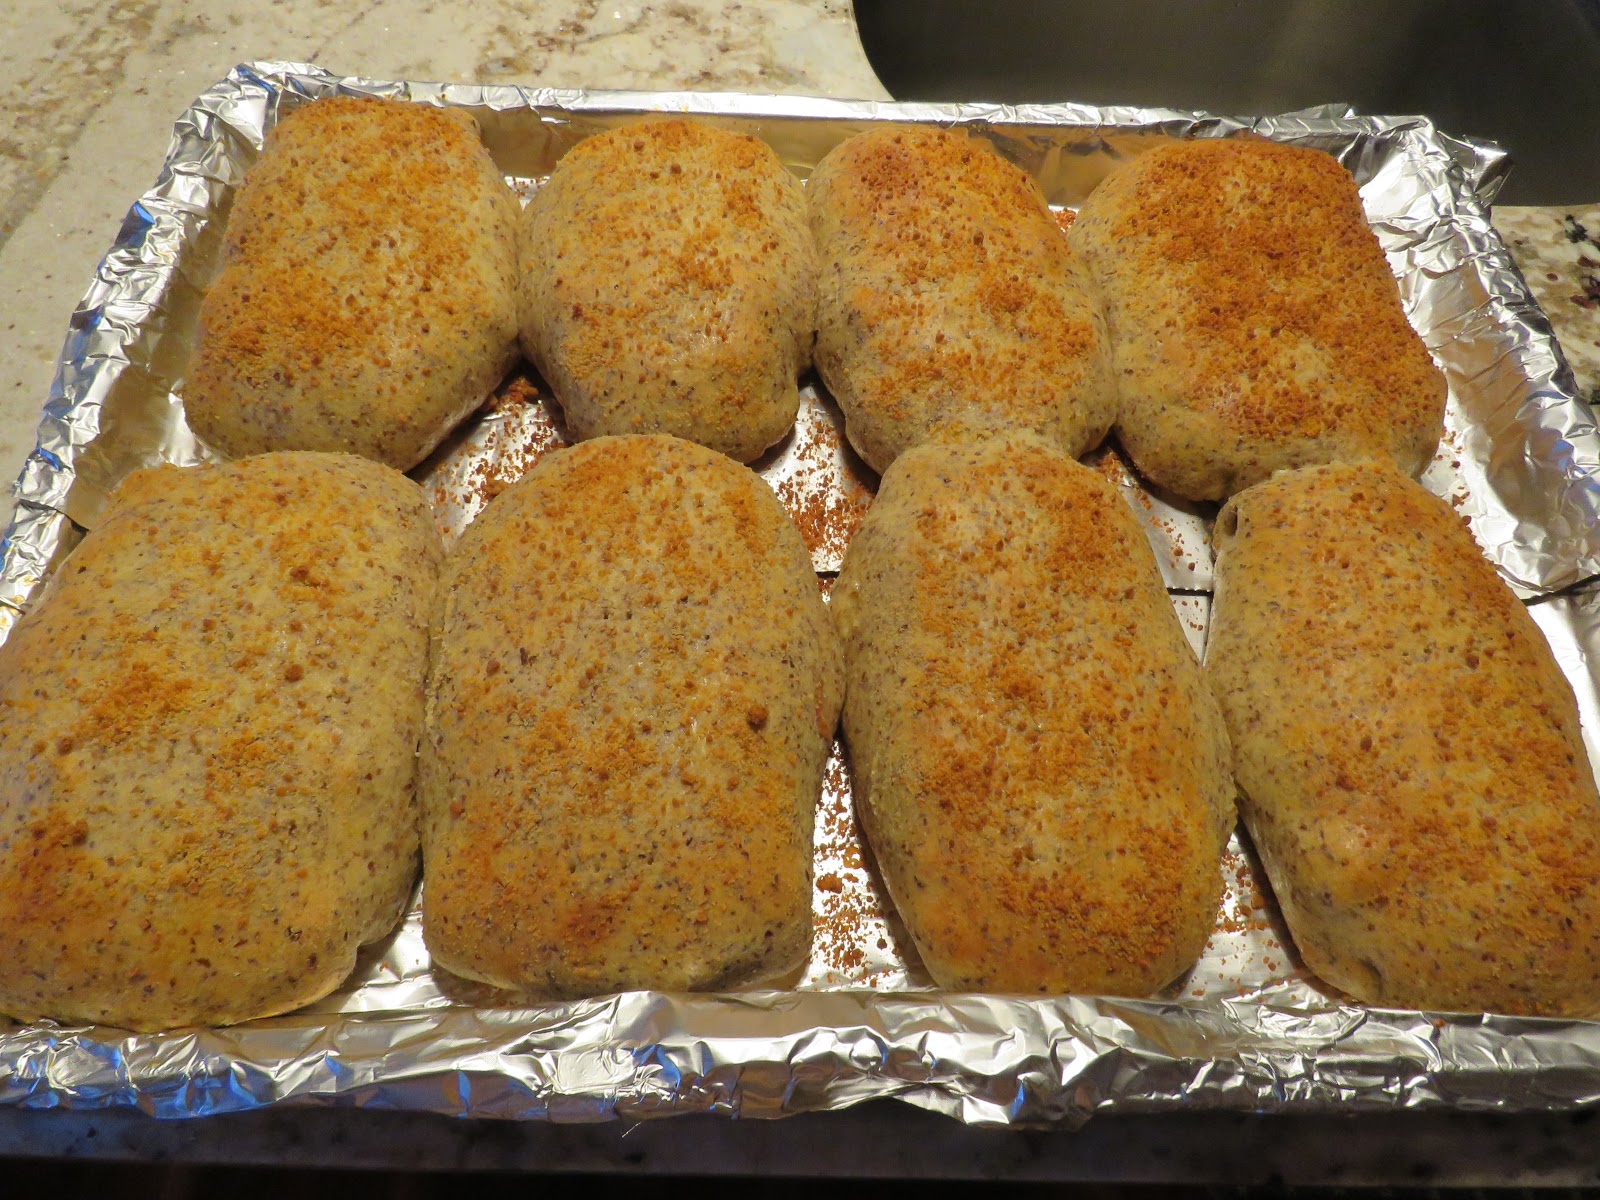 baked, low carb, almond flour chicken stuffed loaves